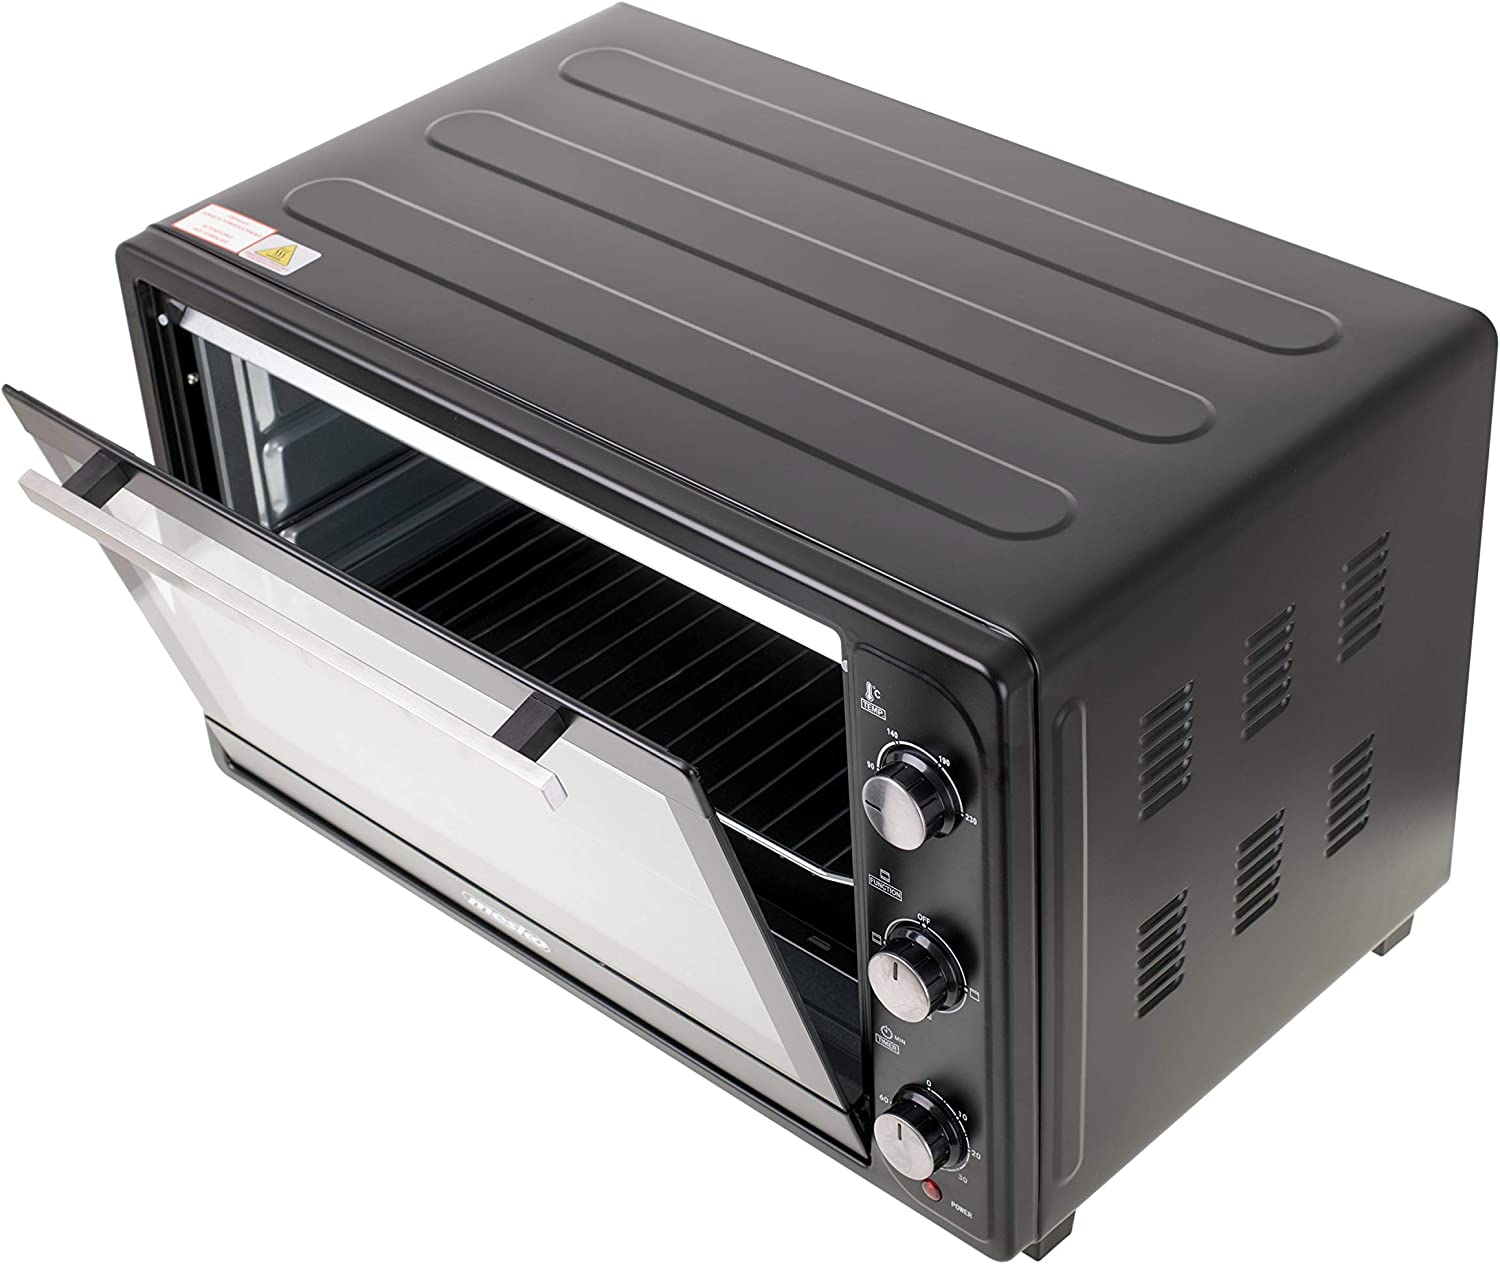 Young Mesko MS6021 Mini Oven 66l Electric Mini Oven 3000W Oven Timer 60 Minutes 3 Heating Modes Includes Oven Rack Baking Tray